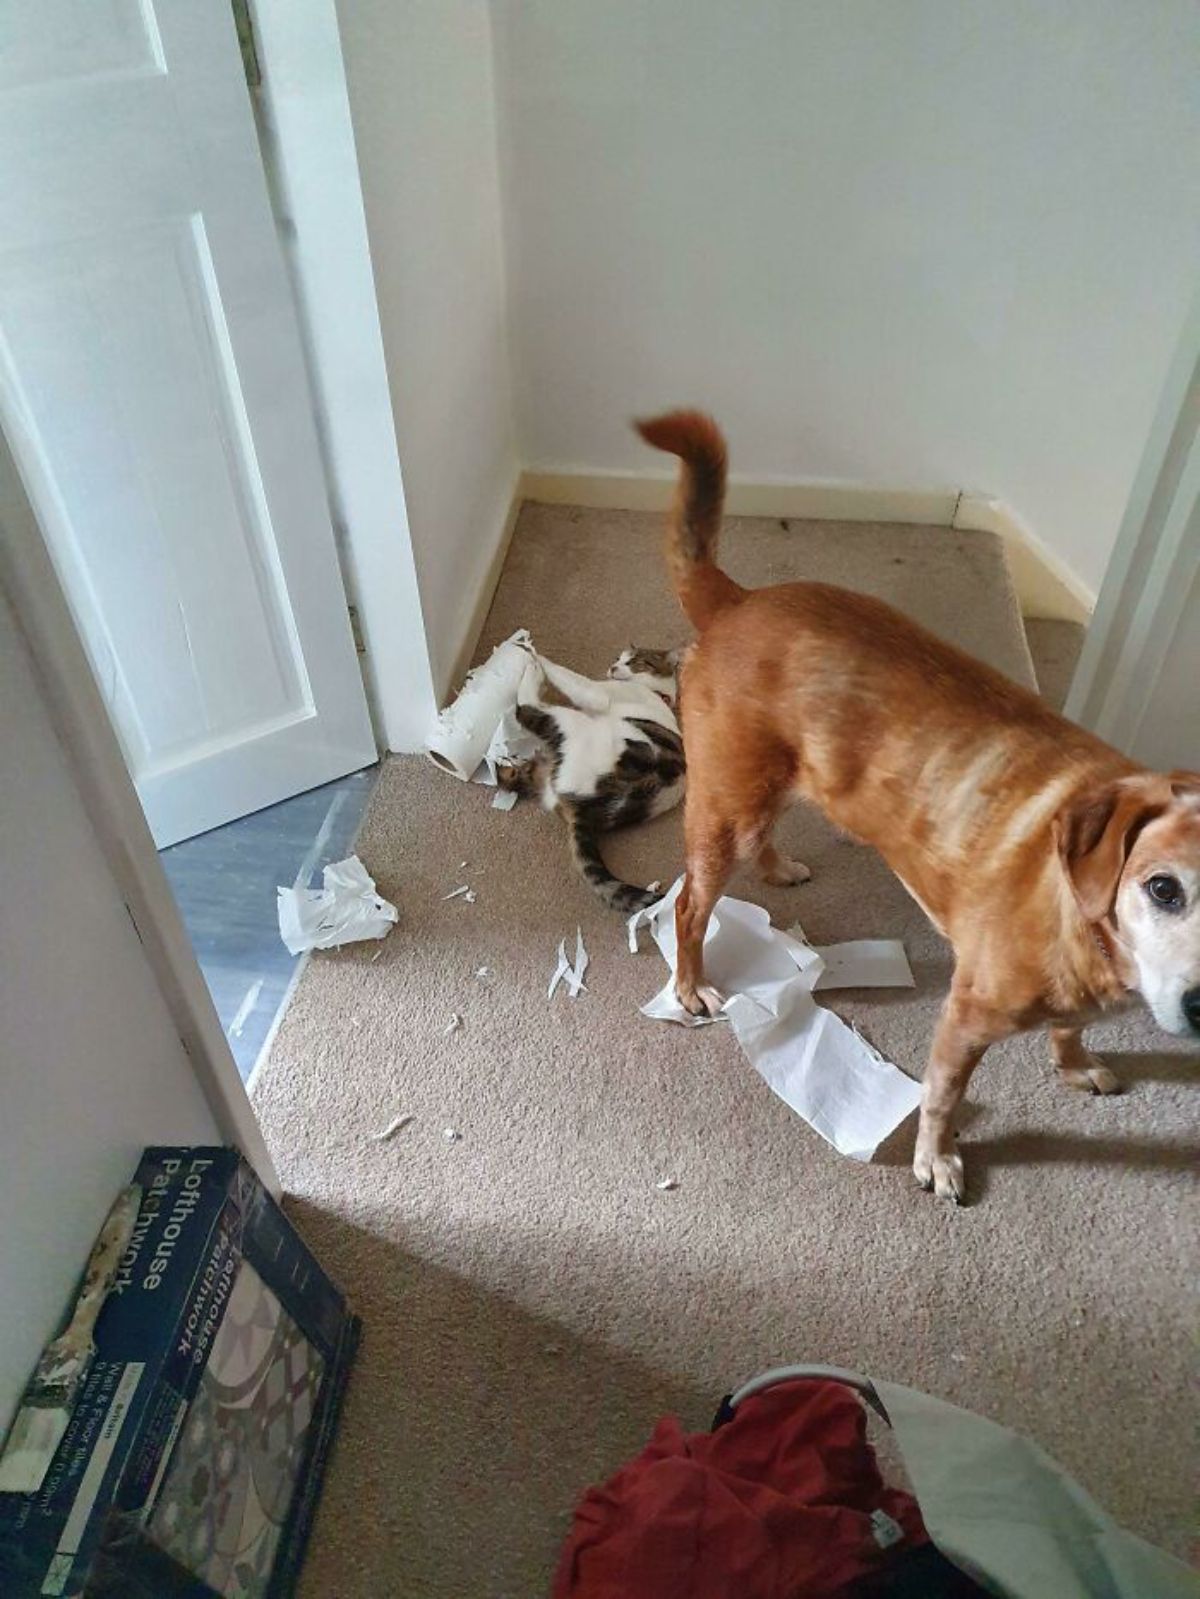 brown dog standing near a white and grye tabby cat ripping up some toilet paper